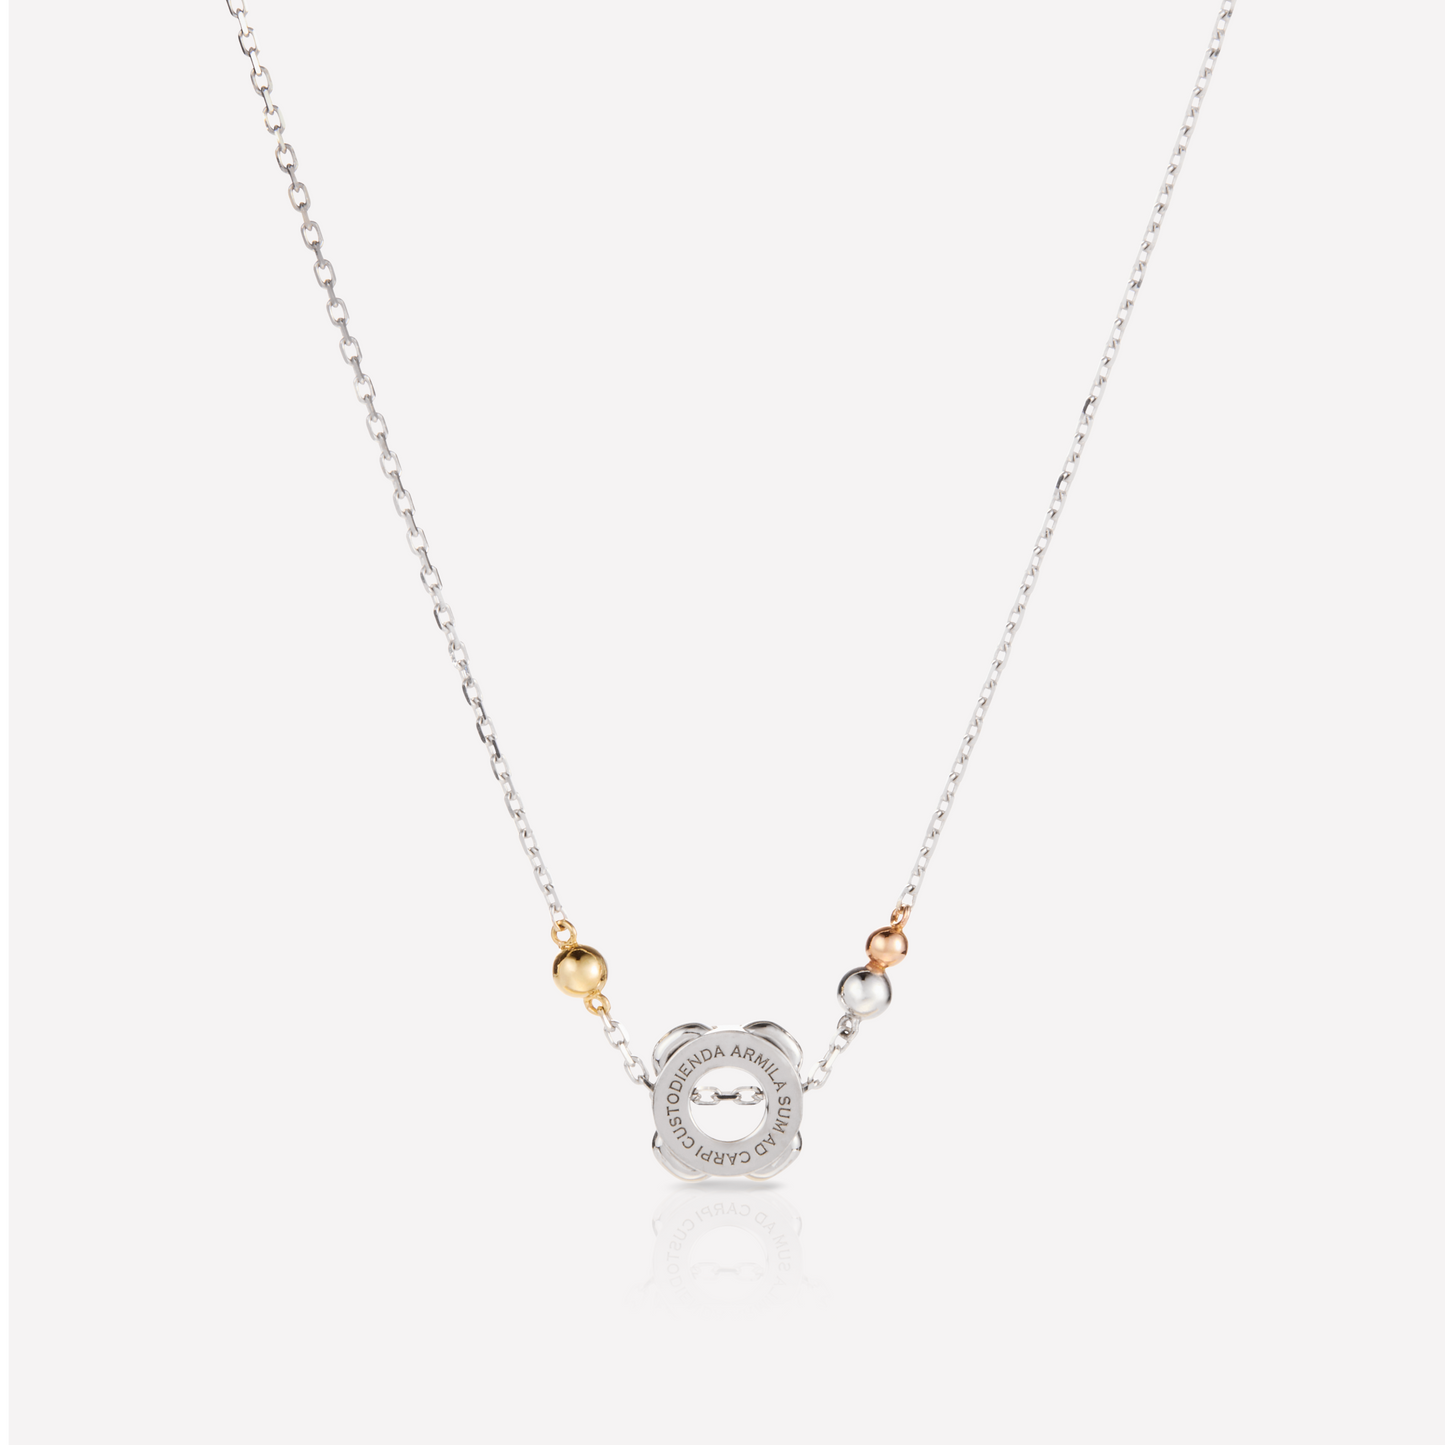 Twined 2.5 Necklace, Droplet